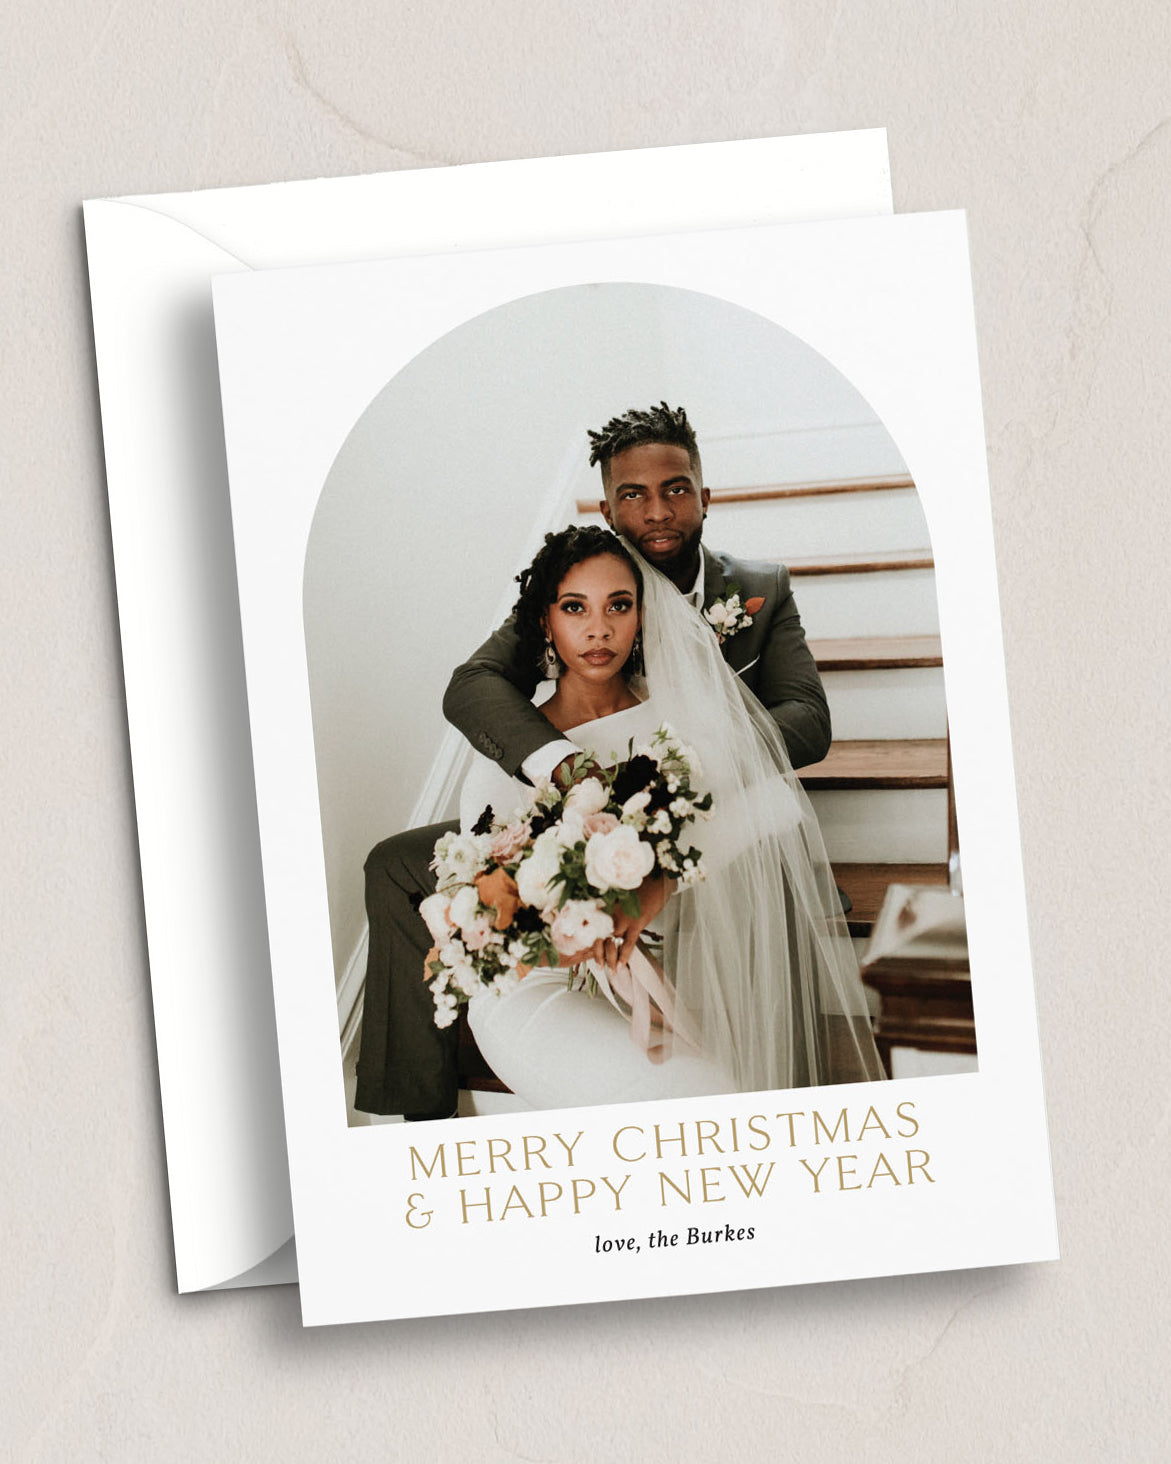 Merry Christmas + Happy New Year Arch Photo Card from Leighwood Design Studio